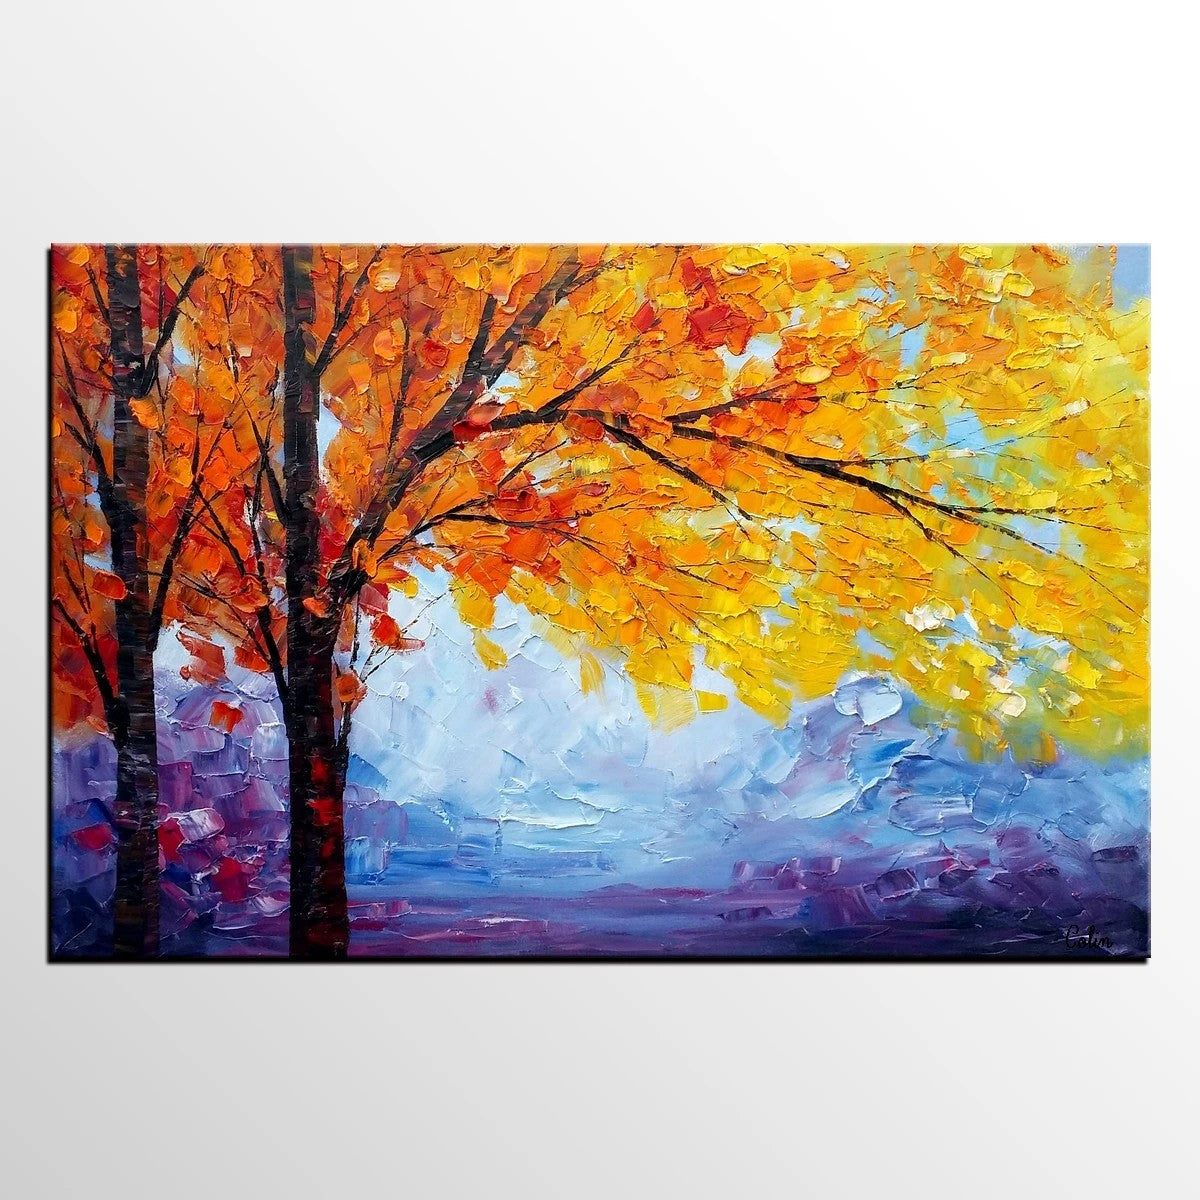 Autumn Tree Painting, Landscape Painting on Canvas, Abstract Landscape Painting, Living Room Canvas Painting, Palette Knife Paintings